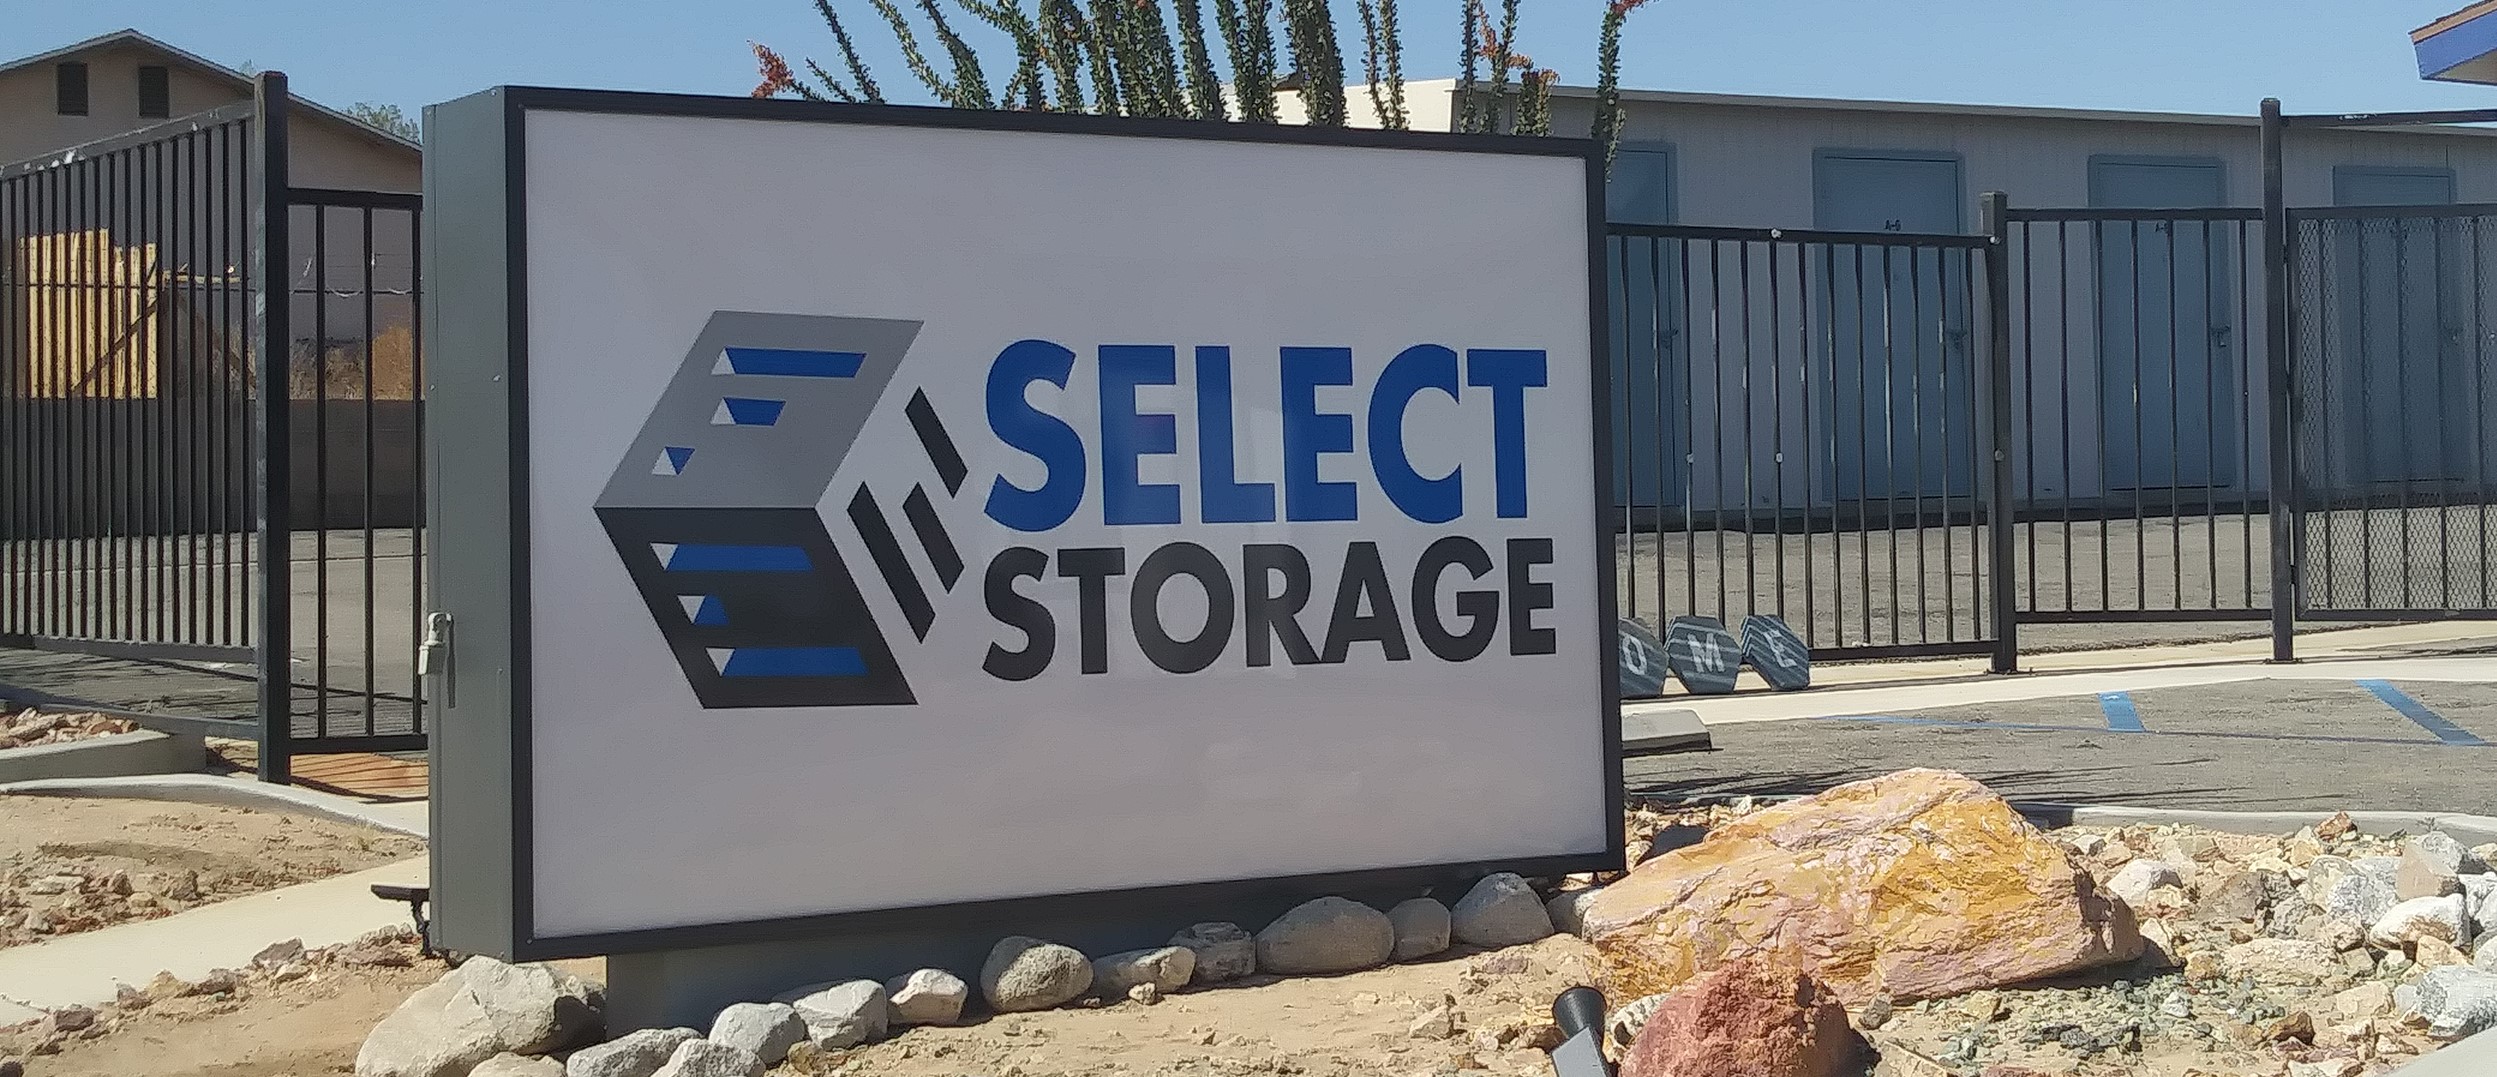 Reliable Drive Up Storage At Select Storage